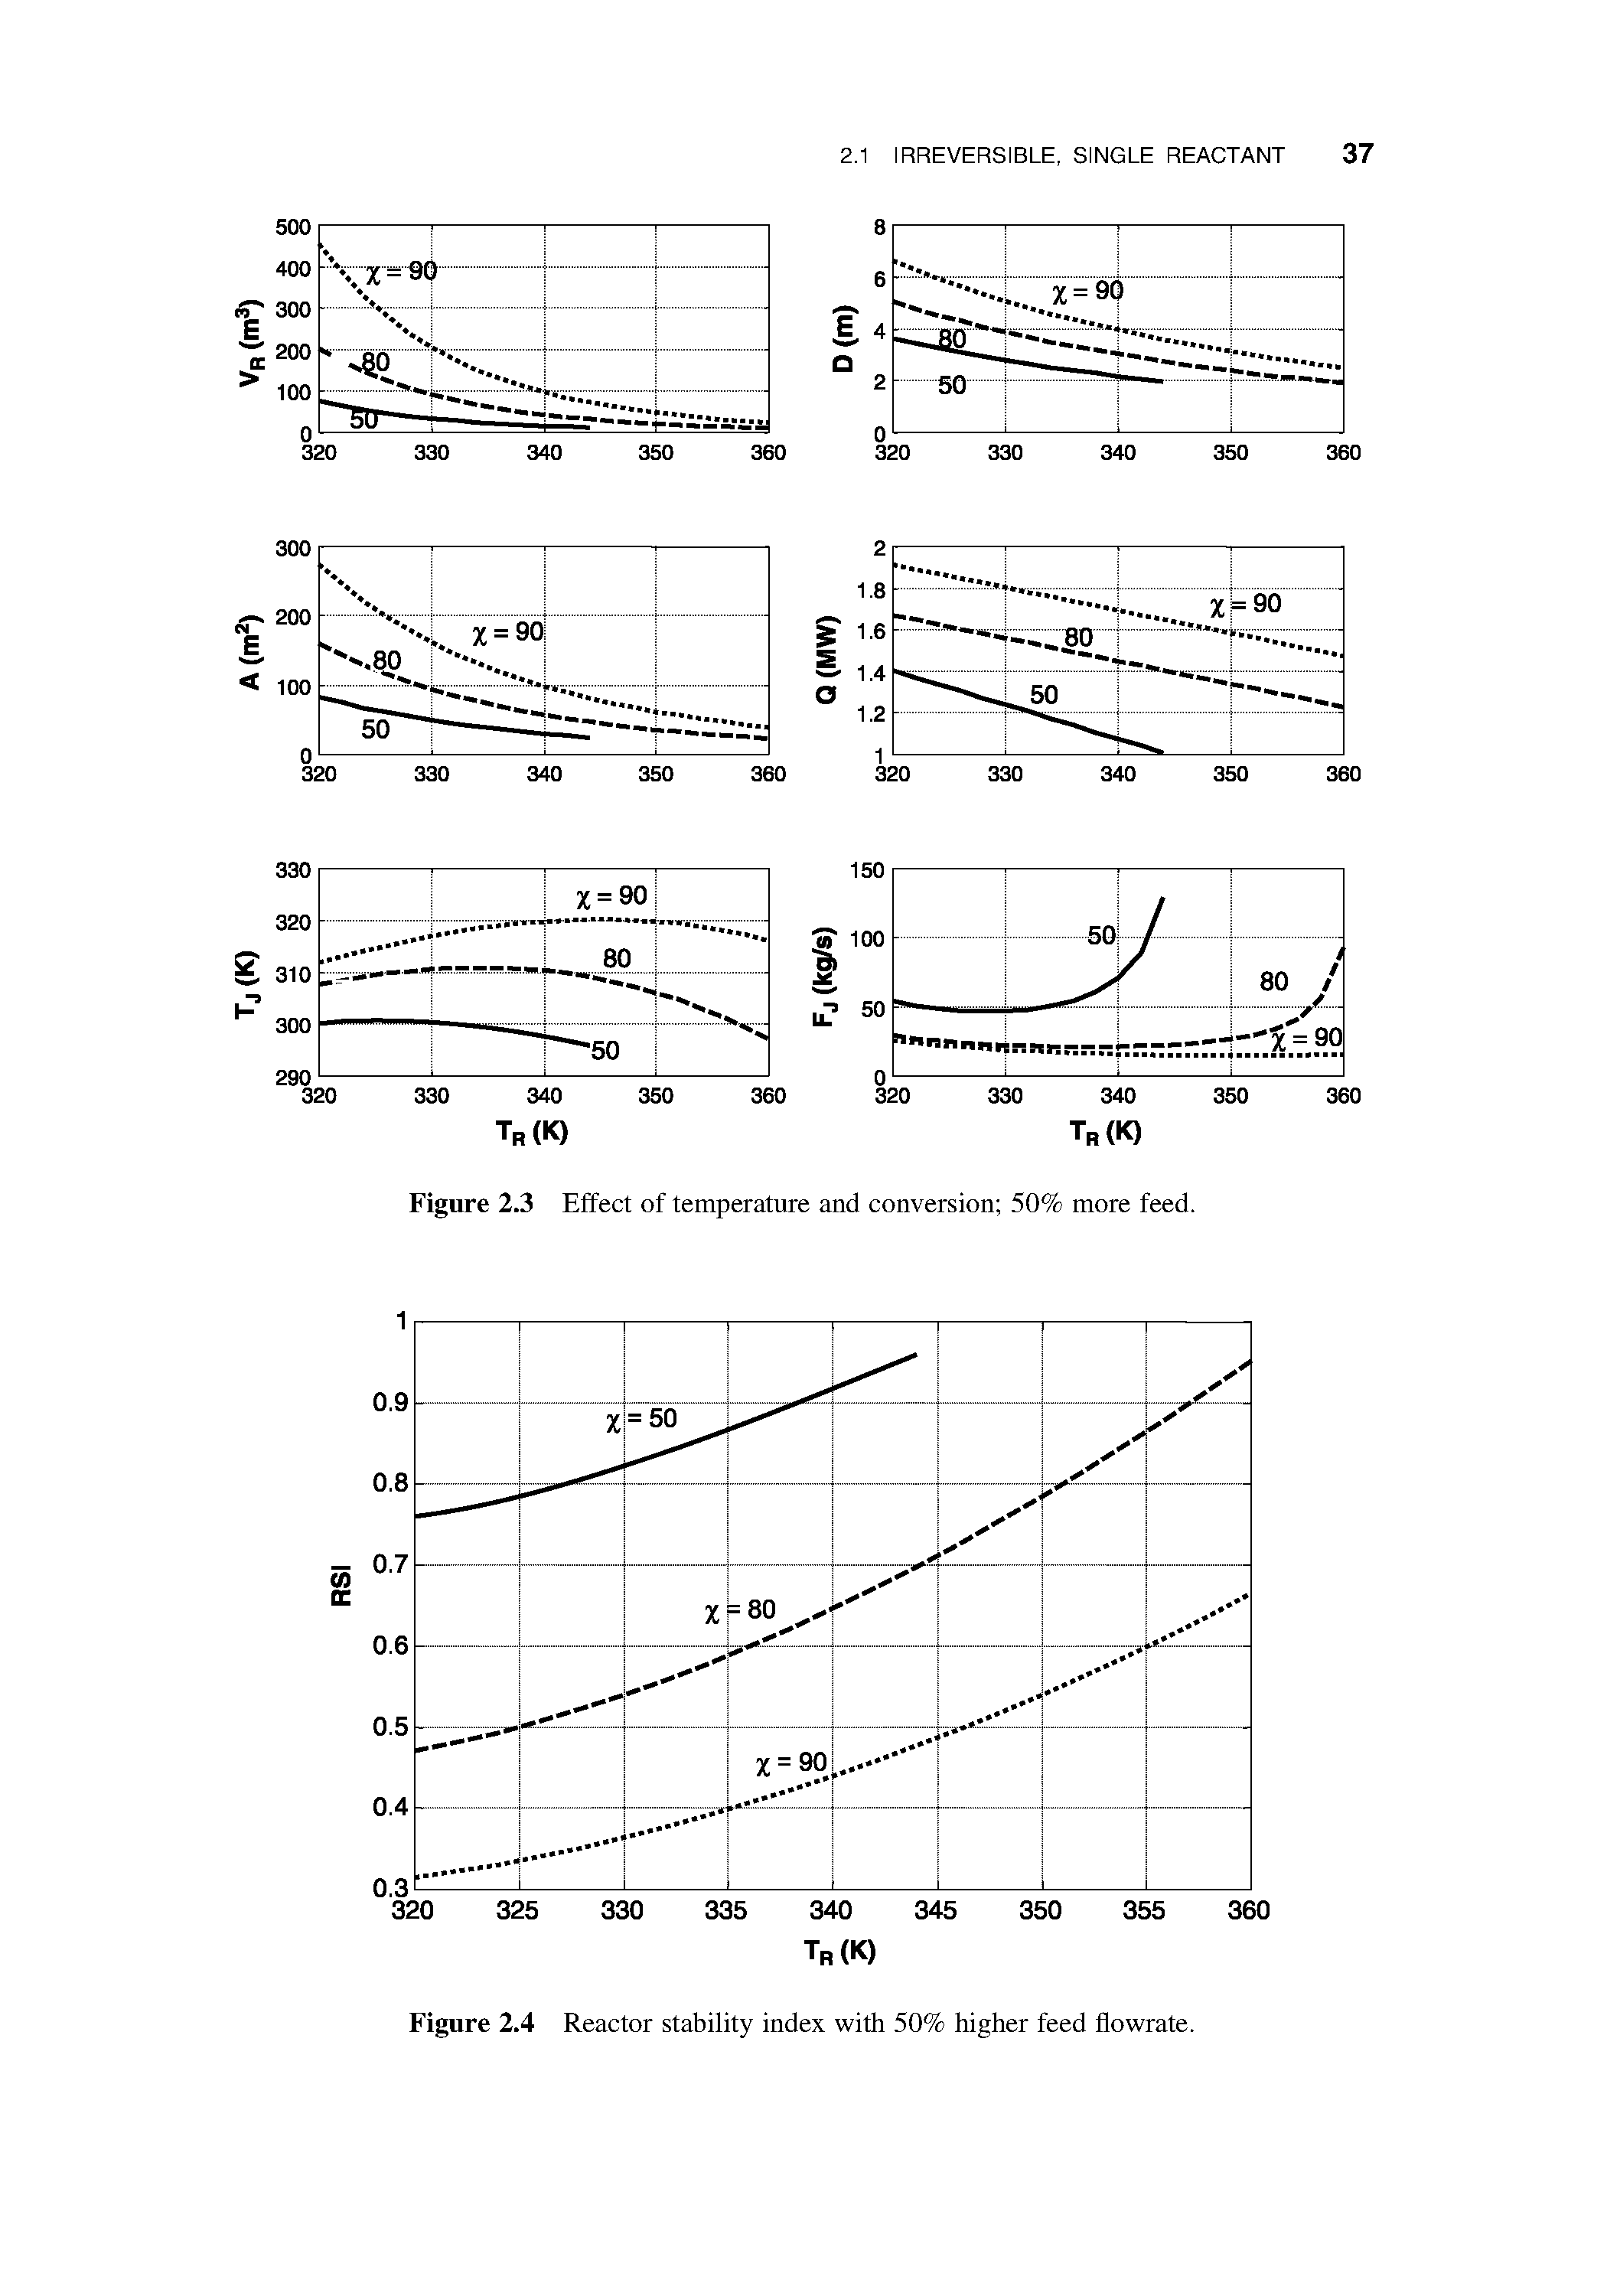 Figure 2.4 Reactor stability index with 50% higher feed flowrate.